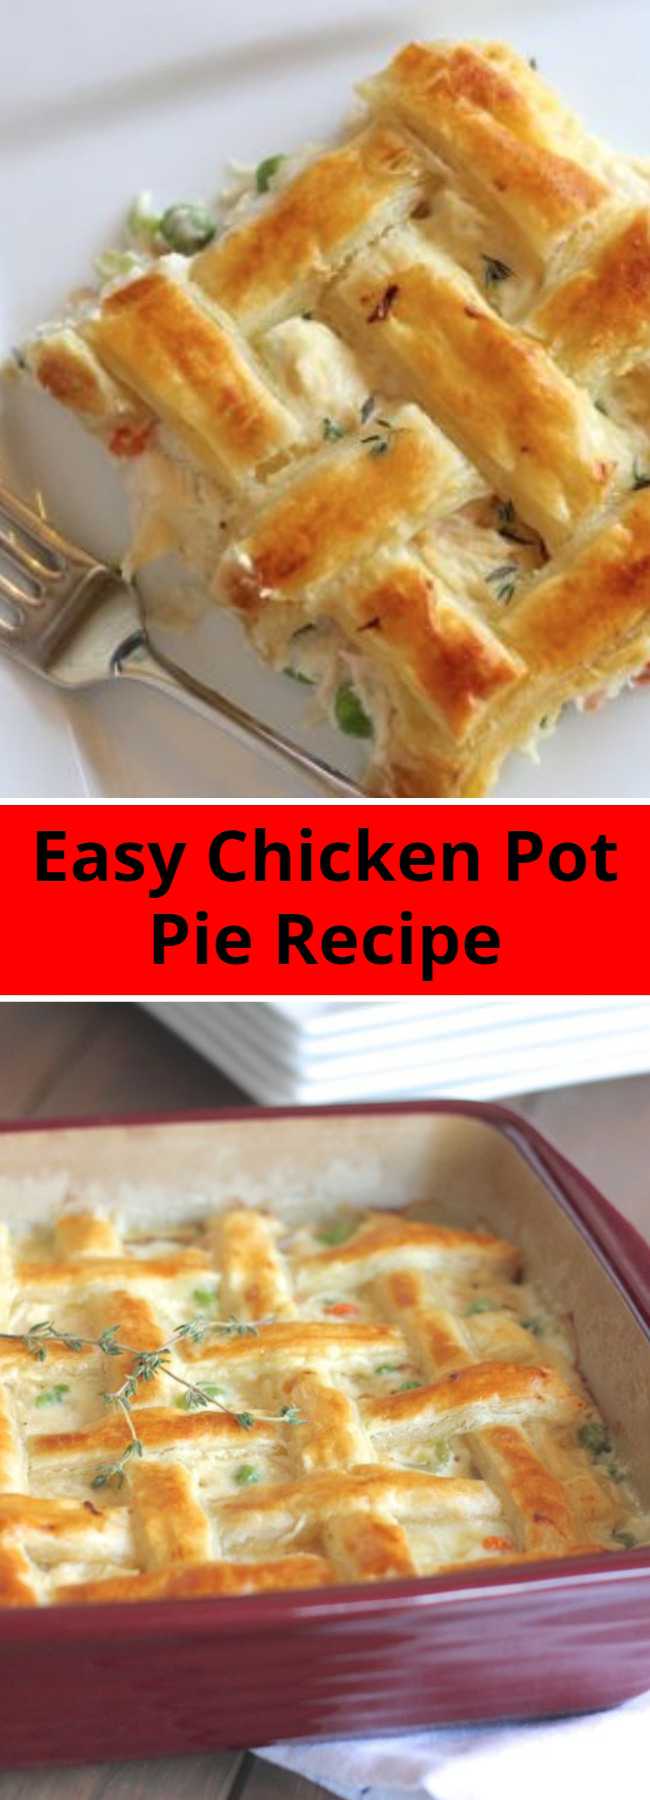 Easy Chicken Pot Pie Recipe - This Chicken Pot Pie has become one of my most popular recipes! It pairs really well with a nice green salad, and that fancy lattice crust makes dinner guests feel extra special. Don’t worry if you’ve never made one before, it’s really not too difficult.